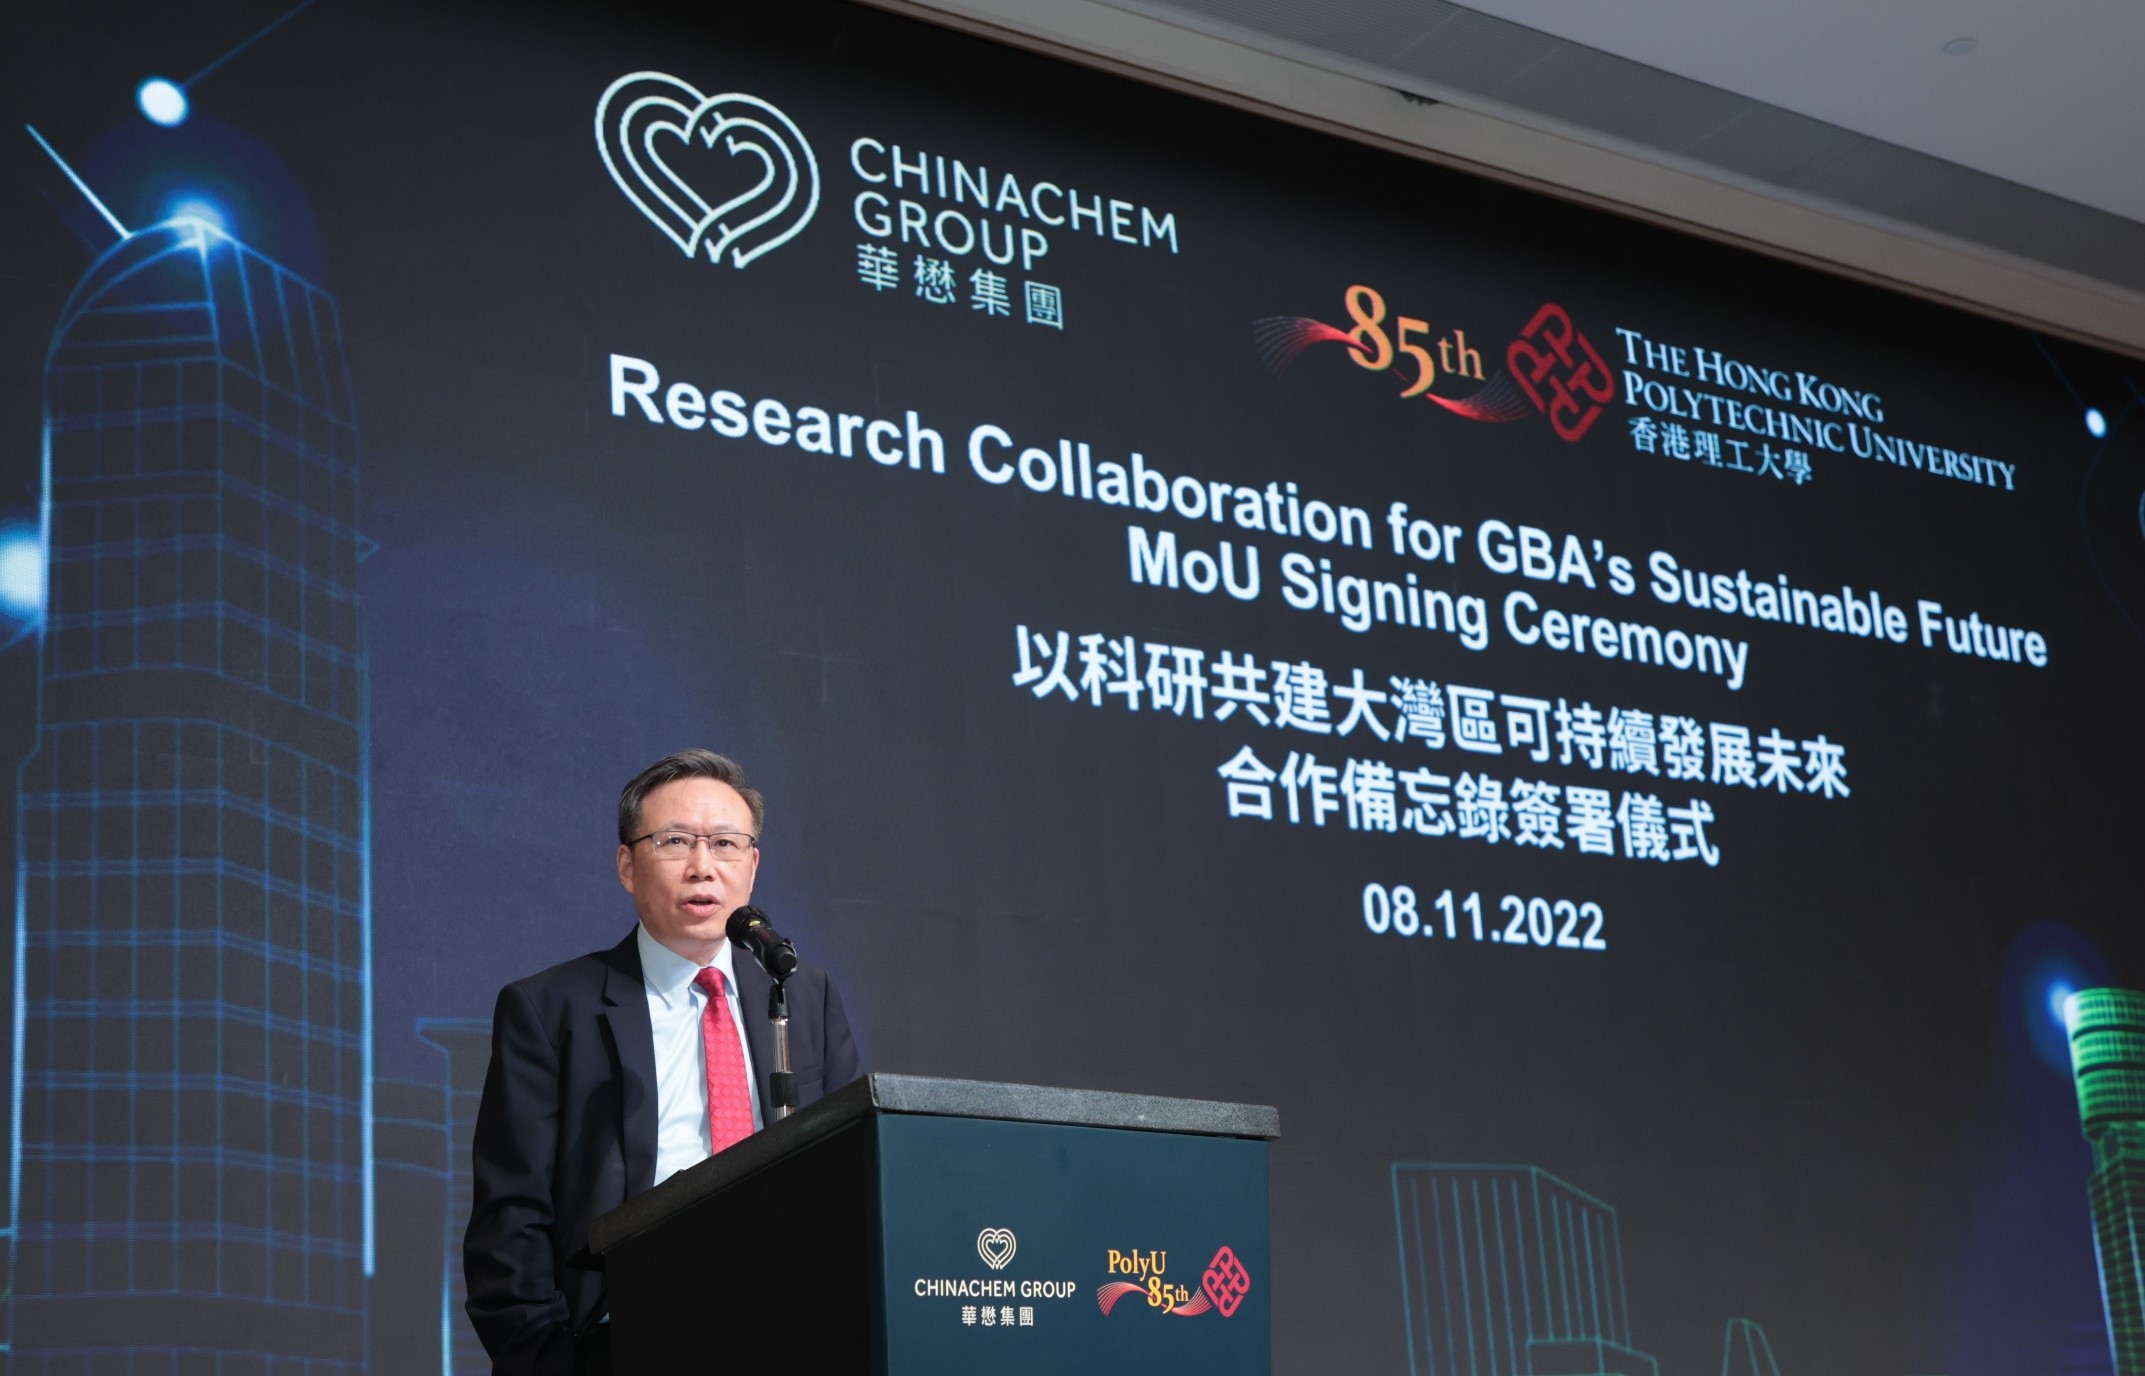 Prof. Jin-Guang Teng said PolyU will continue to deepen its collaboration with key partners and stakeholders in society to proactively translate research outcomes into real-world solutions to foster more liveable and sustainable communities in Hong Kong, the Nation and the world.